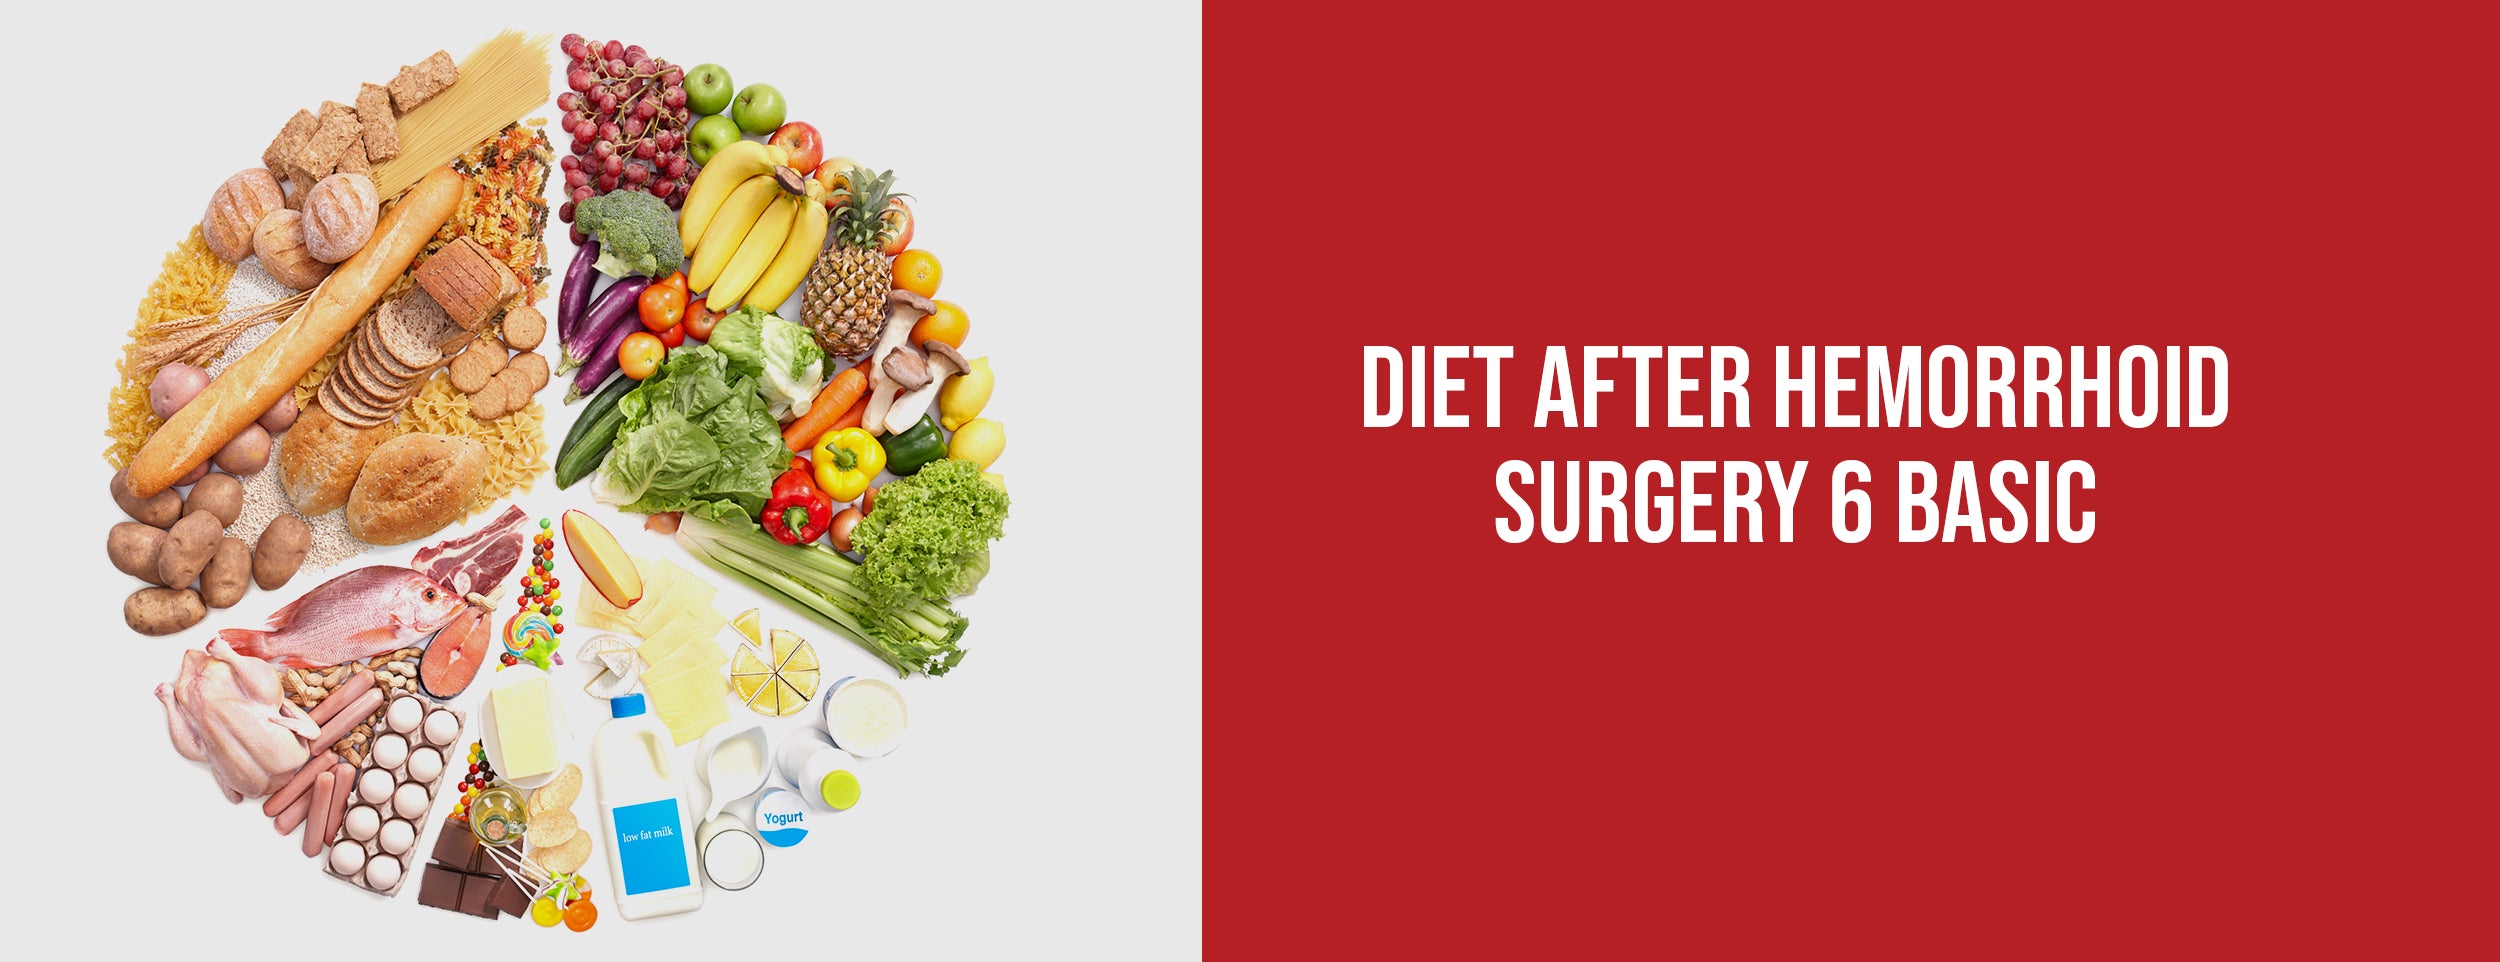 6 Sections of the Diet after Hemorrhoid Surgery